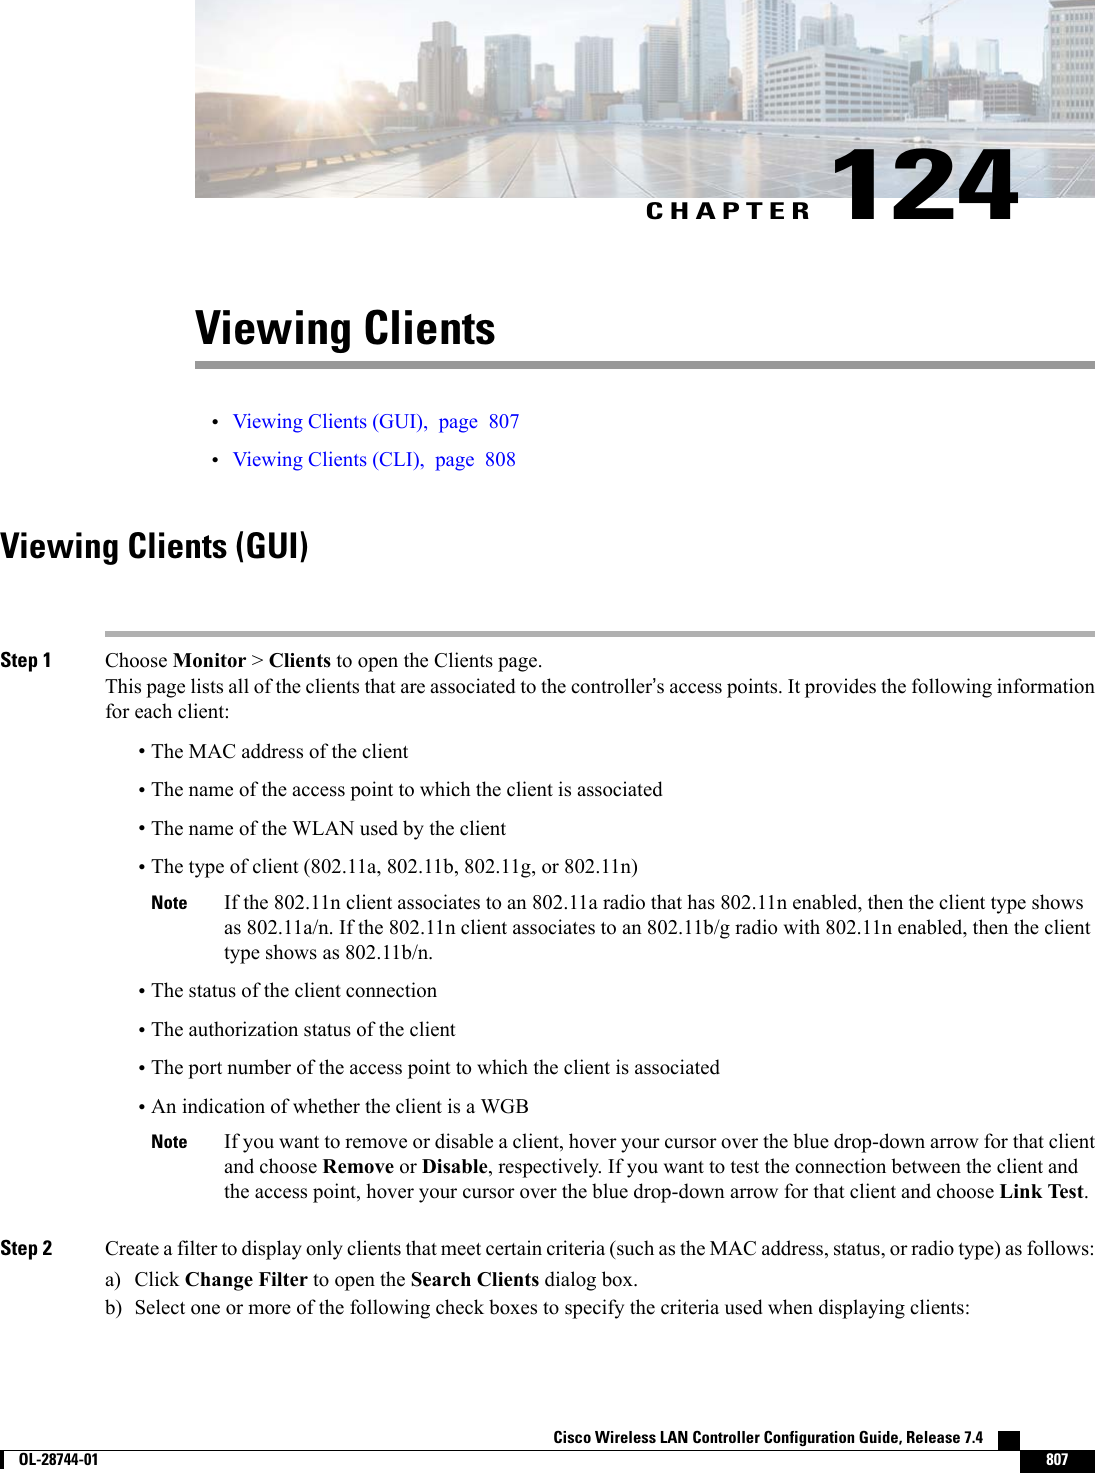 CHAPTER 124Viewing Clients•Viewing Clients (GUI), page 807•Viewing Clients (CLI), page 808Viewing Clients (GUI)Step 1 Choose Monitor &gt;Clients to open the Clients page.This page lists all of the clients that are associated to the controller’s access points. It provides the following informationfor each client:•The MAC address of the client•The name of the access point to which the client is associated•The name of the WLAN used by the client•The type of client (802.11a, 802.11b, 802.11g, or 802.11n)If the 802.11n client associates to an 802.11a radio that has 802.11n enabled, then the client type showsas 802.11a/n. If the 802.11n client associates to an 802.11b/g radio with 802.11n enabled, then the clienttype shows as 802.11b/n.Note•The status of the client connection•The authorization status of the client•The port number of the access point to which the client is associated•An indication of whether the client is a WGBIf you want to remove or disable a client, hover your cursor over the blue drop-down arrow for that clientand choose Remove or Disable, respectively. If you want to test the connection between the client andthe access point, hover your cursor over the blue drop-down arrow for that client and choose Link Test.NoteStep 2 Create a filter to display only clients that meet certain criteria (such as the MAC address, status, or radio type) as follows:a) Click Change Filter to open the Search Clients dialog box.b) Select one or more of the following check boxes to specify the criteria used when displaying clients:Cisco Wireless LAN Controller Configuration Guide, Release 7.4        OL-28744-01 807